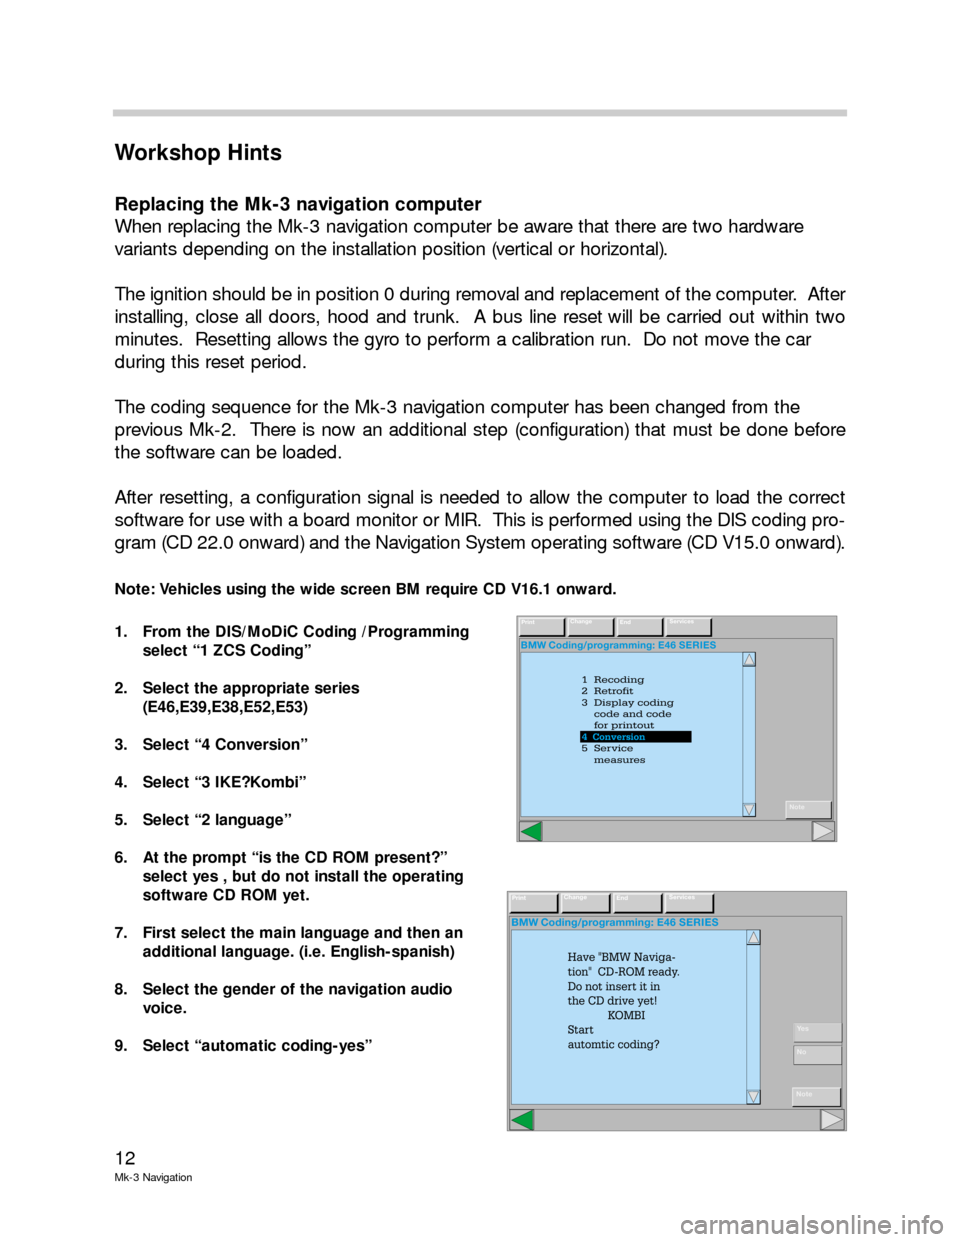 BMW 5 SERIES 2003 E39 Mk3 Navigation System Manual 12
Mk-3 Navigation
Workshop Hints
Replacing the Mk-3 navigation computer
When replacing the Mk-3 navigation computer be aware that there are two hardware 
variants depending on the installation positi